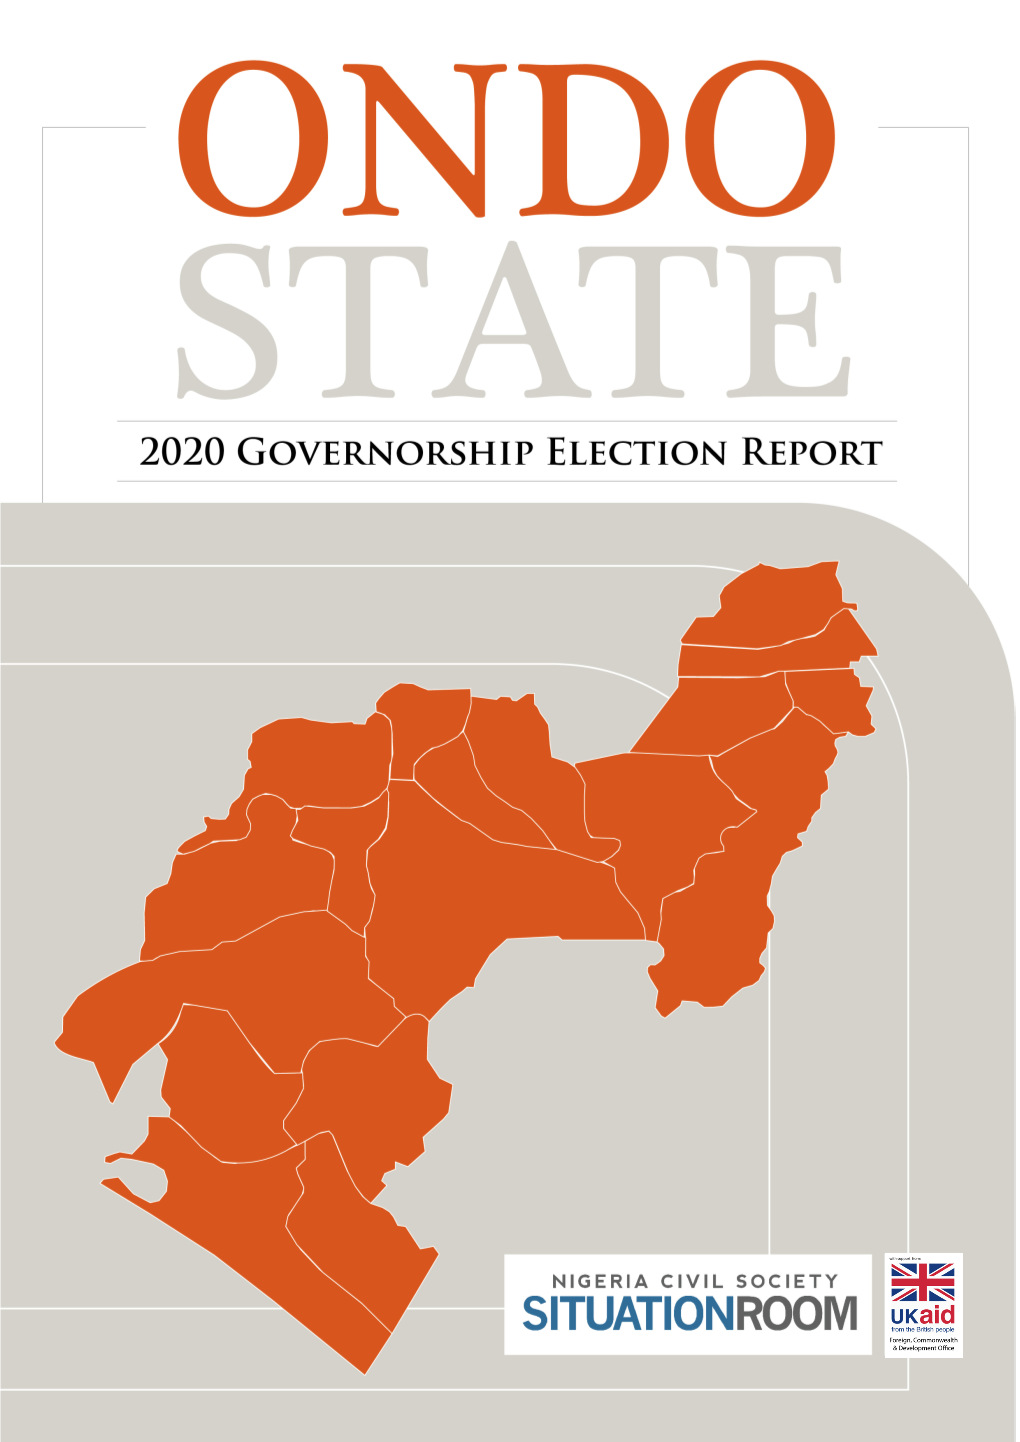 ONDO STATE 2020 GOVERNORSHIP ELECTION REPORT 2020 Nigeria Civil Society Situation Room